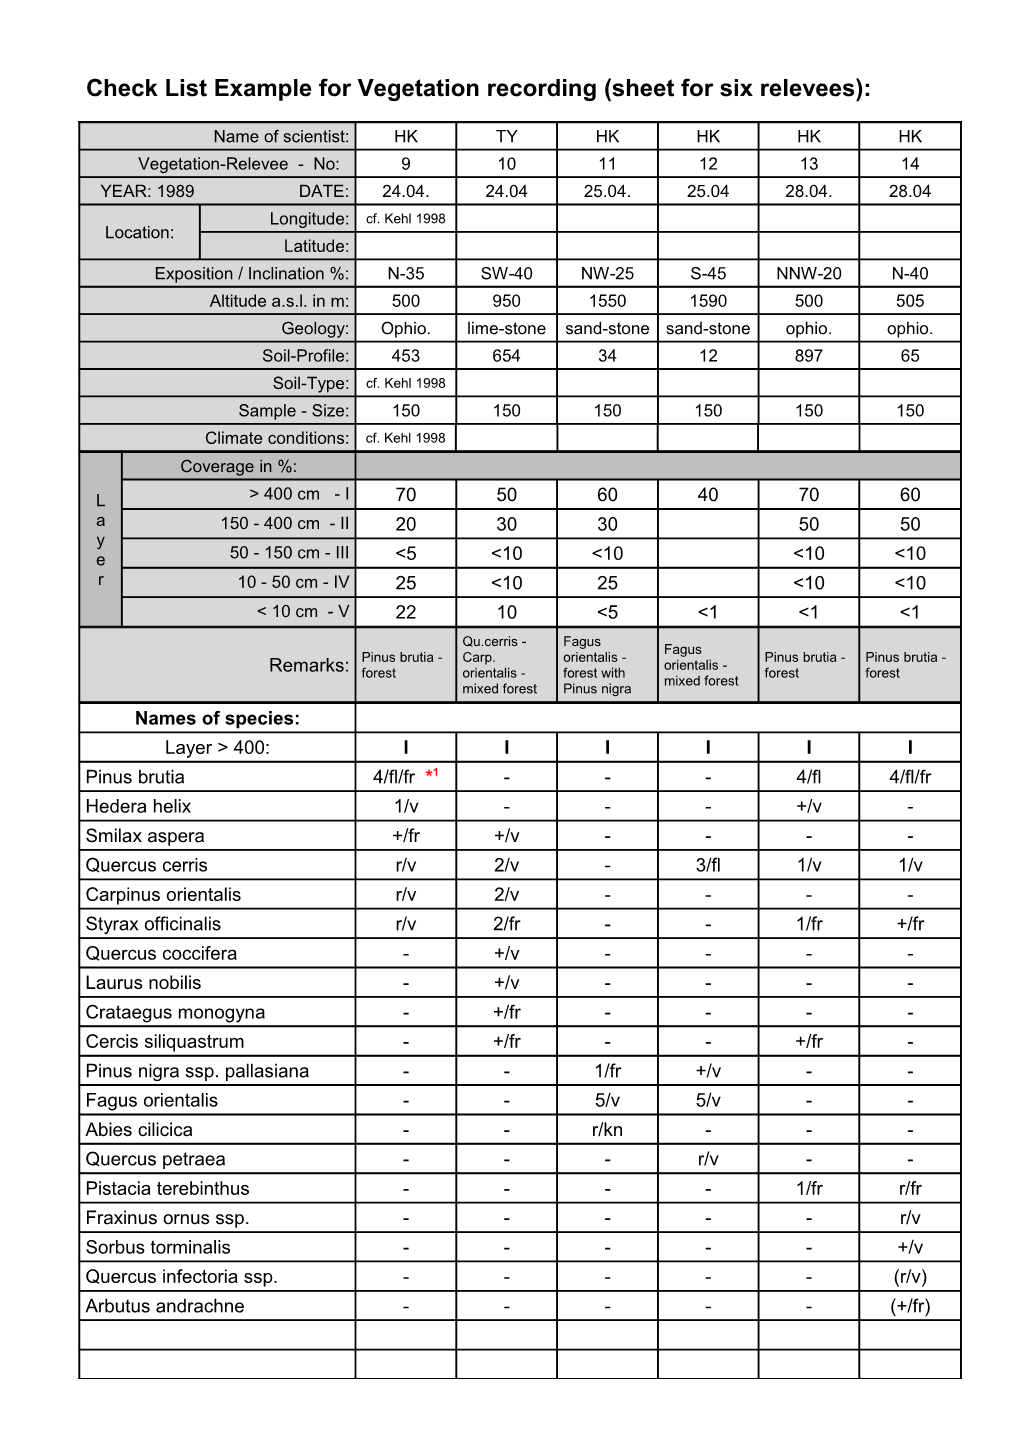 Example Sheet for Vegetation Researches